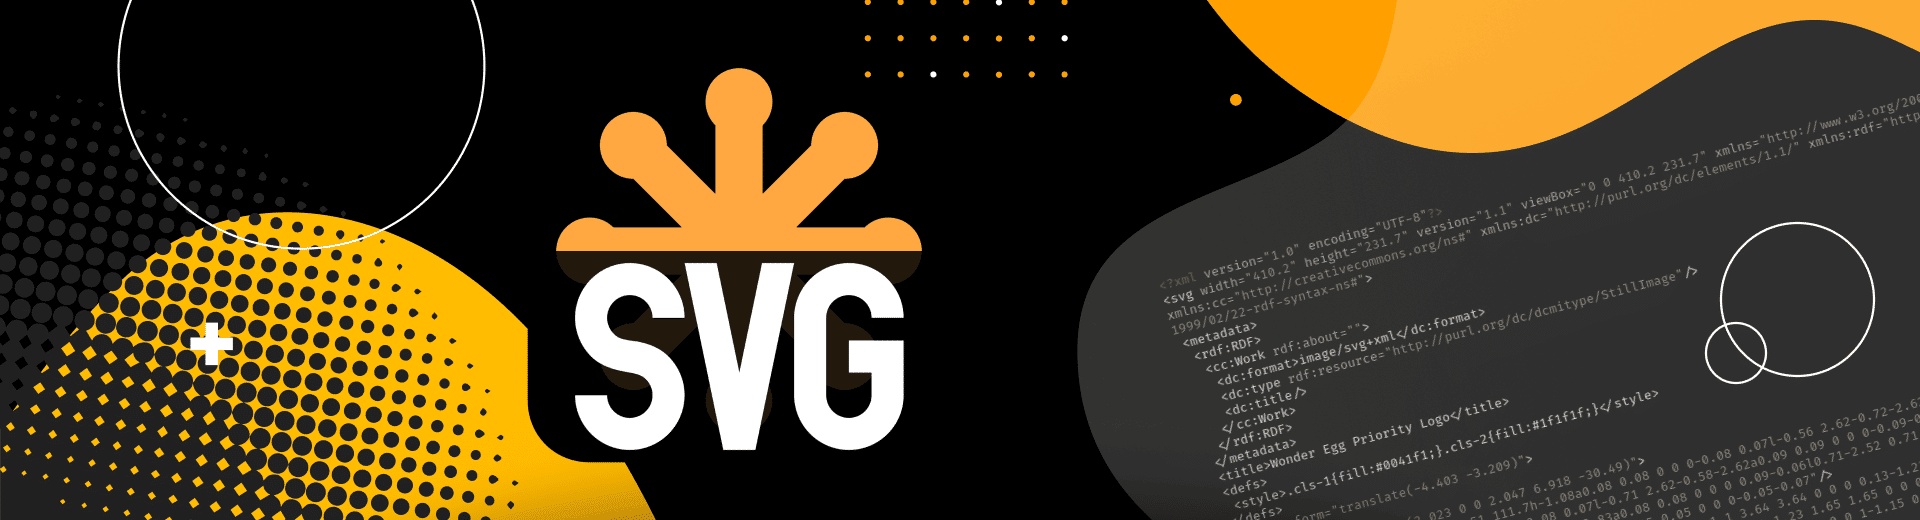 Ways of connection svg graphic to website, features, pros and cons of different ways.